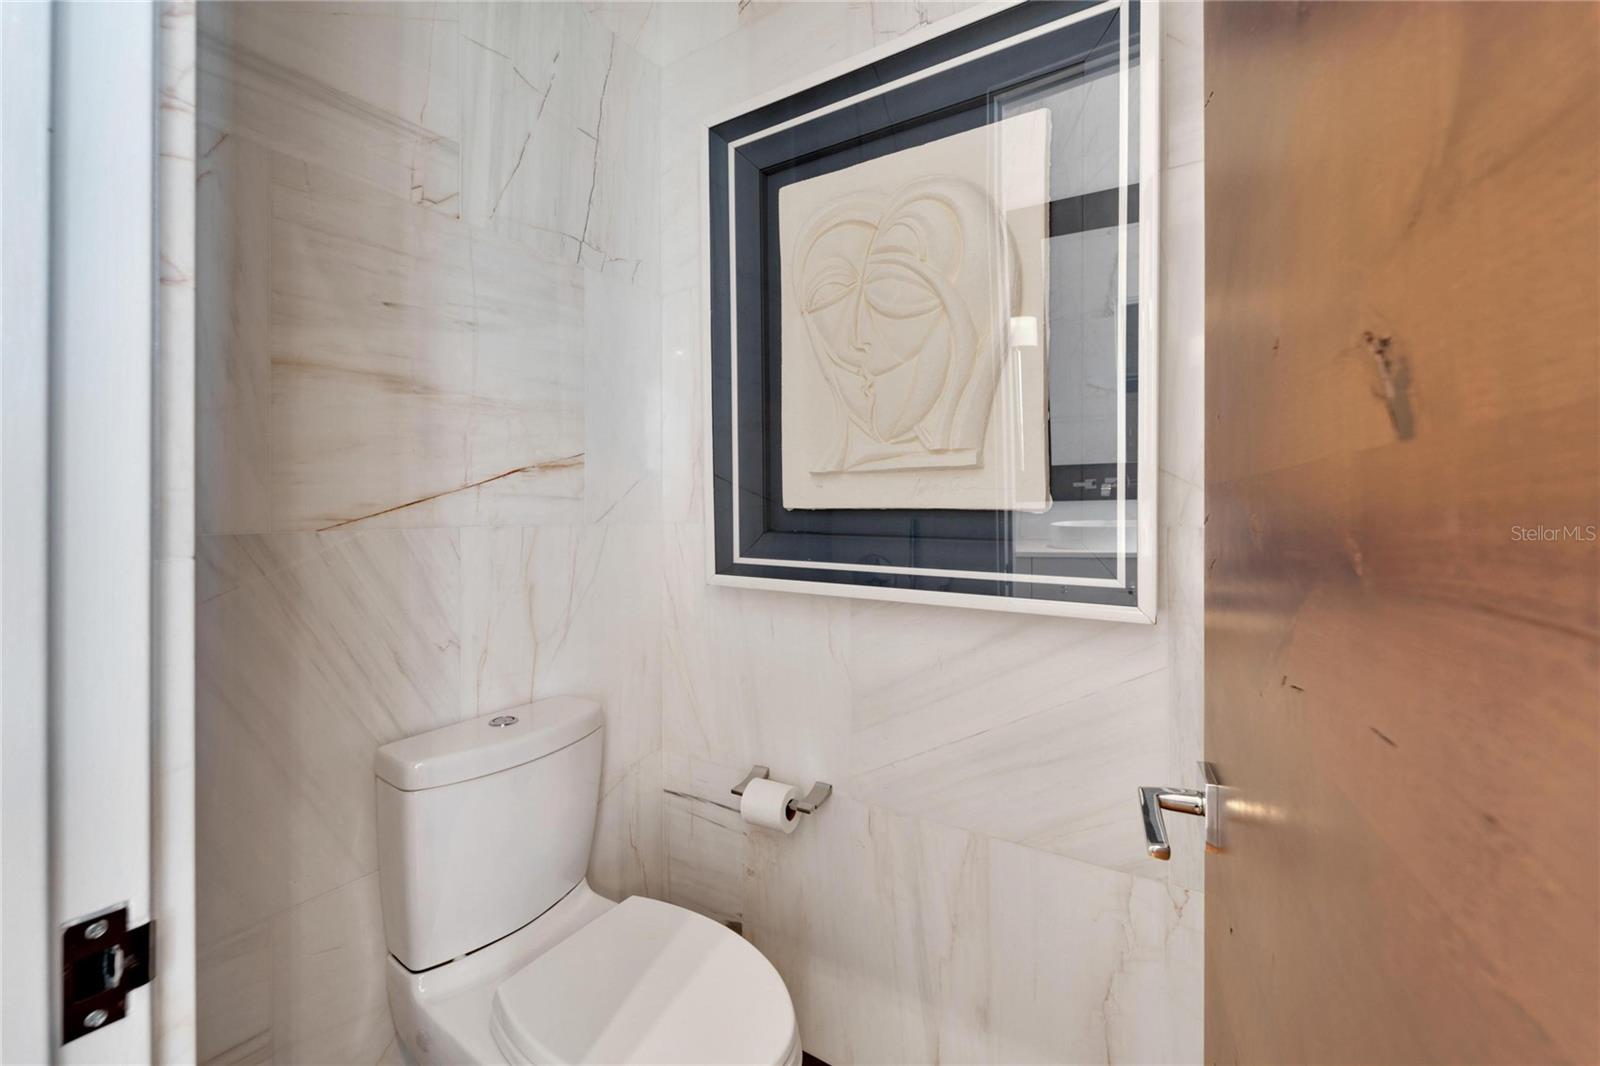 Private toilet with floor to ceiling marble